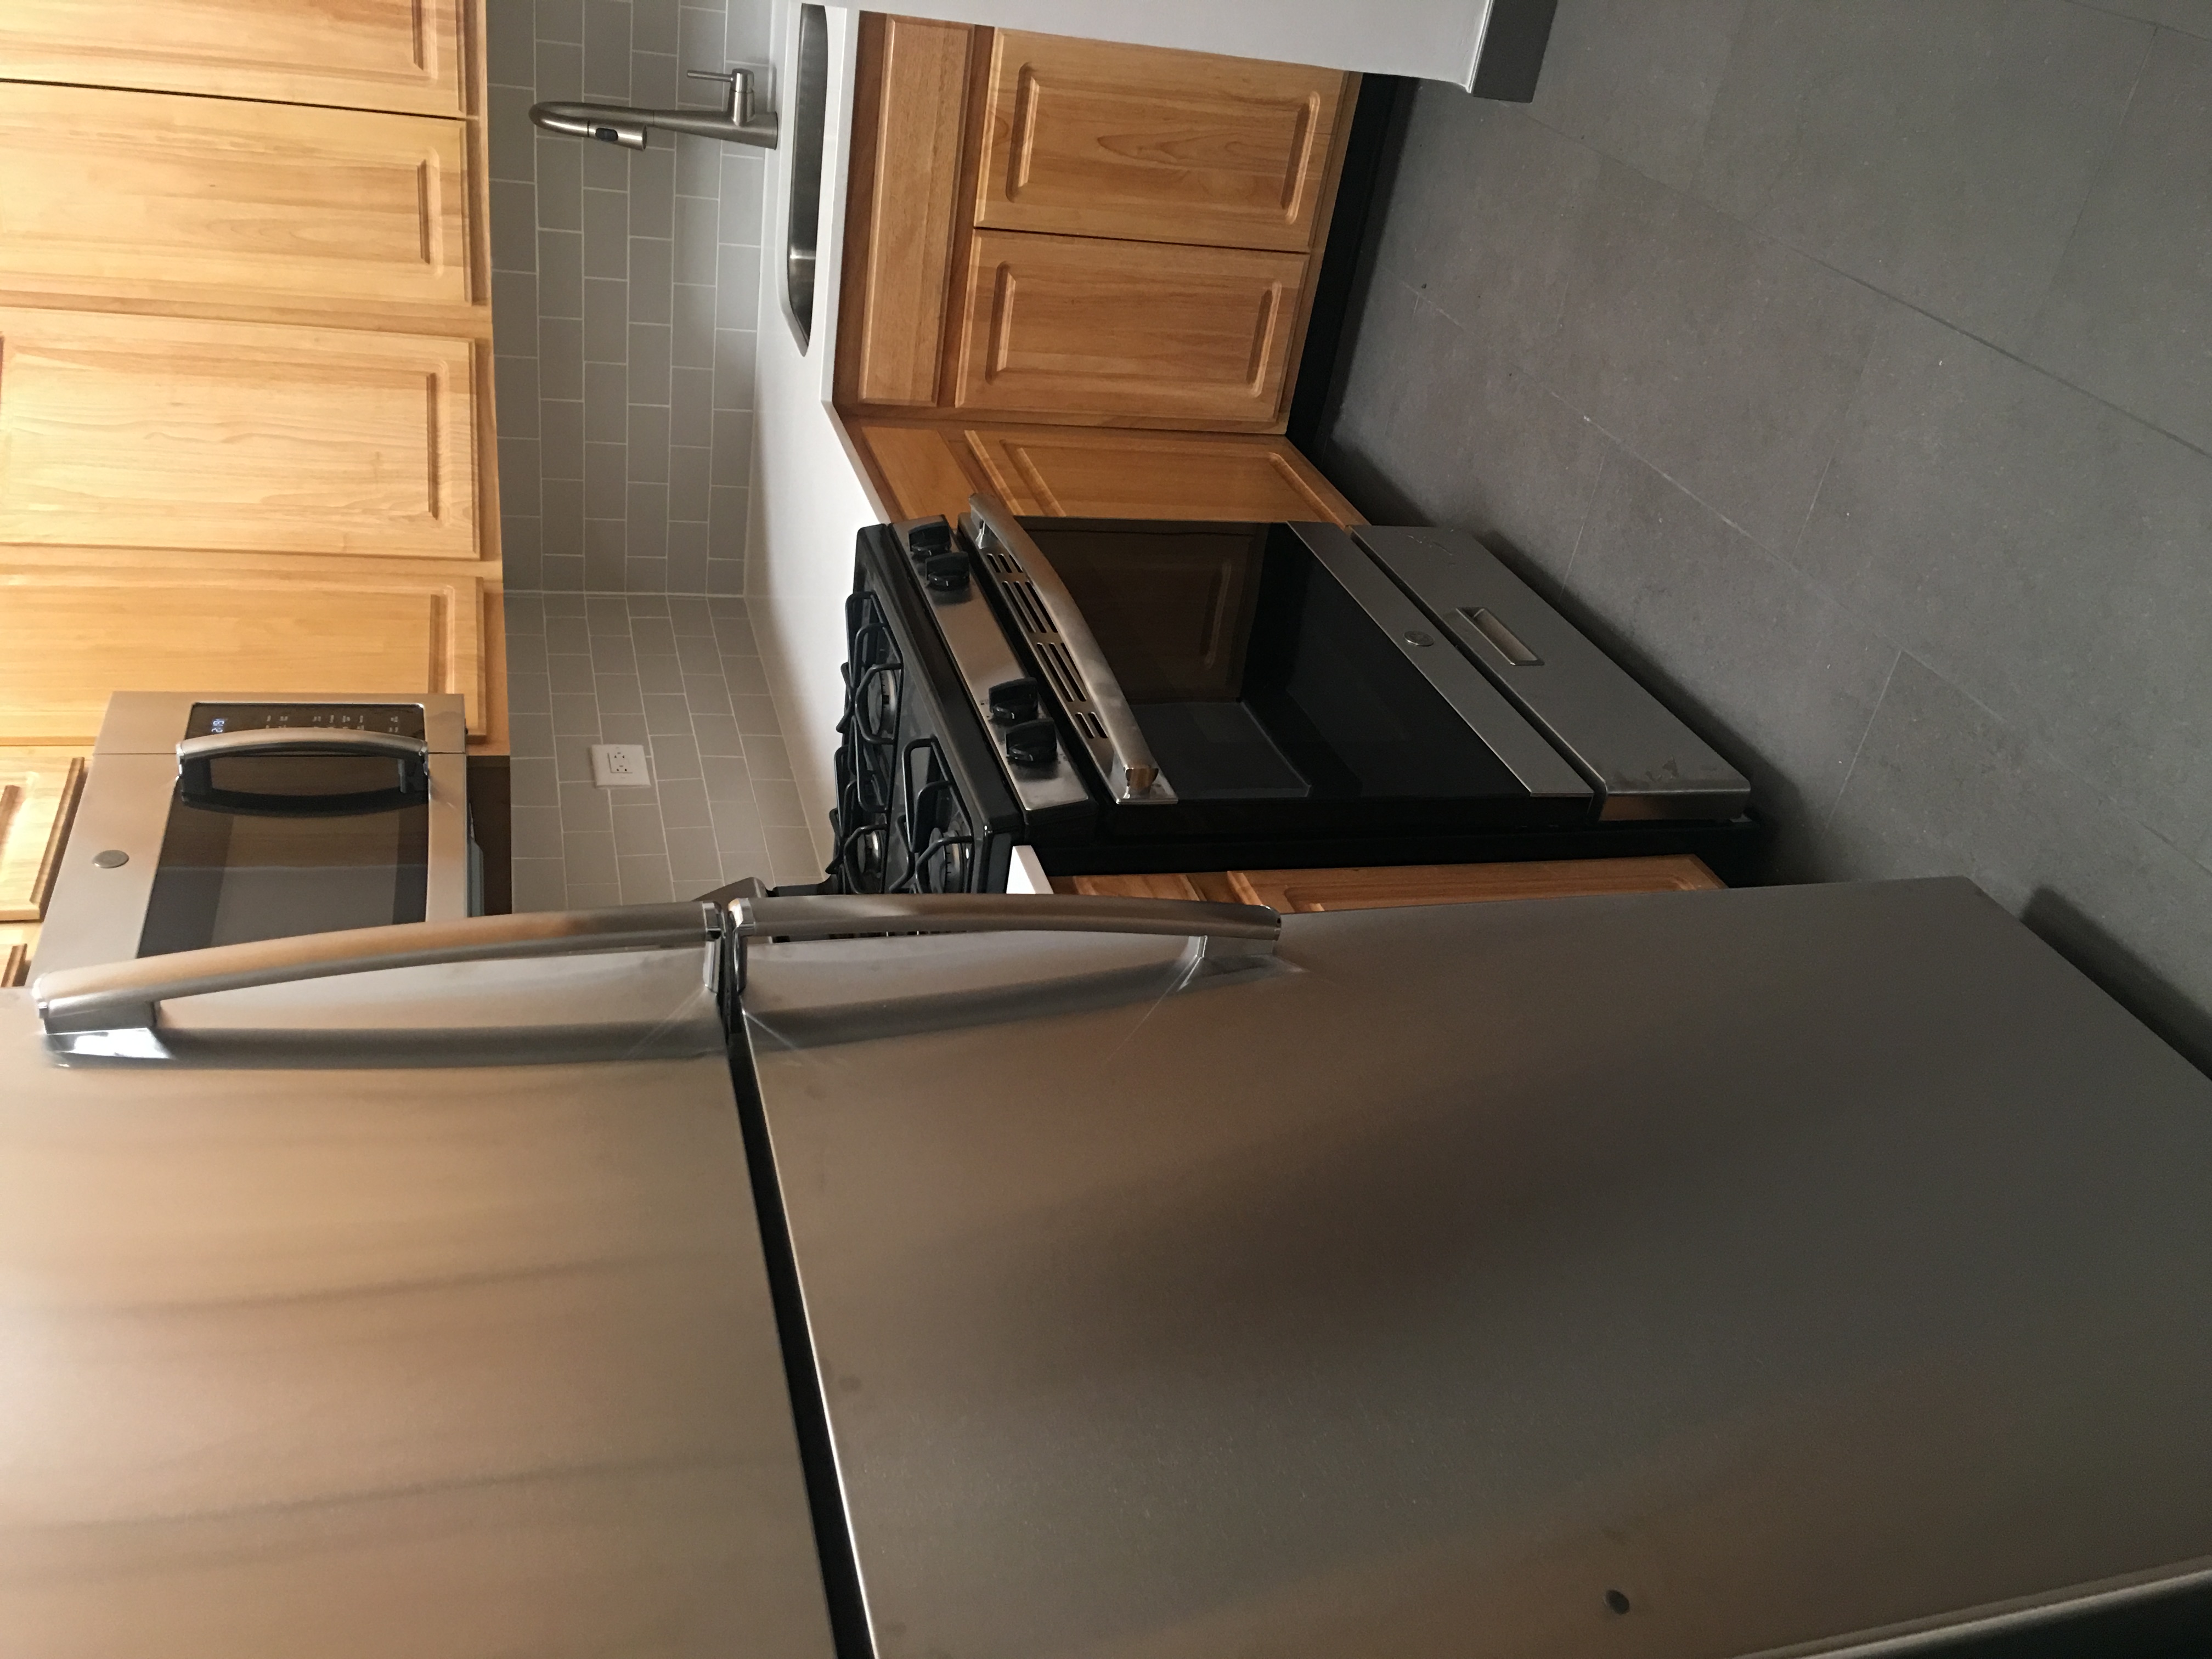 RENOVATED 3BR/1BATH in elevator bldg. Hardwood floors throughout good closet space. 
Laundry in the bldg. Close to NYC transportation and everything Hoboken has to offer.
Heat, Hot water and cooking gas included in the rent! Do Not Miss Out!